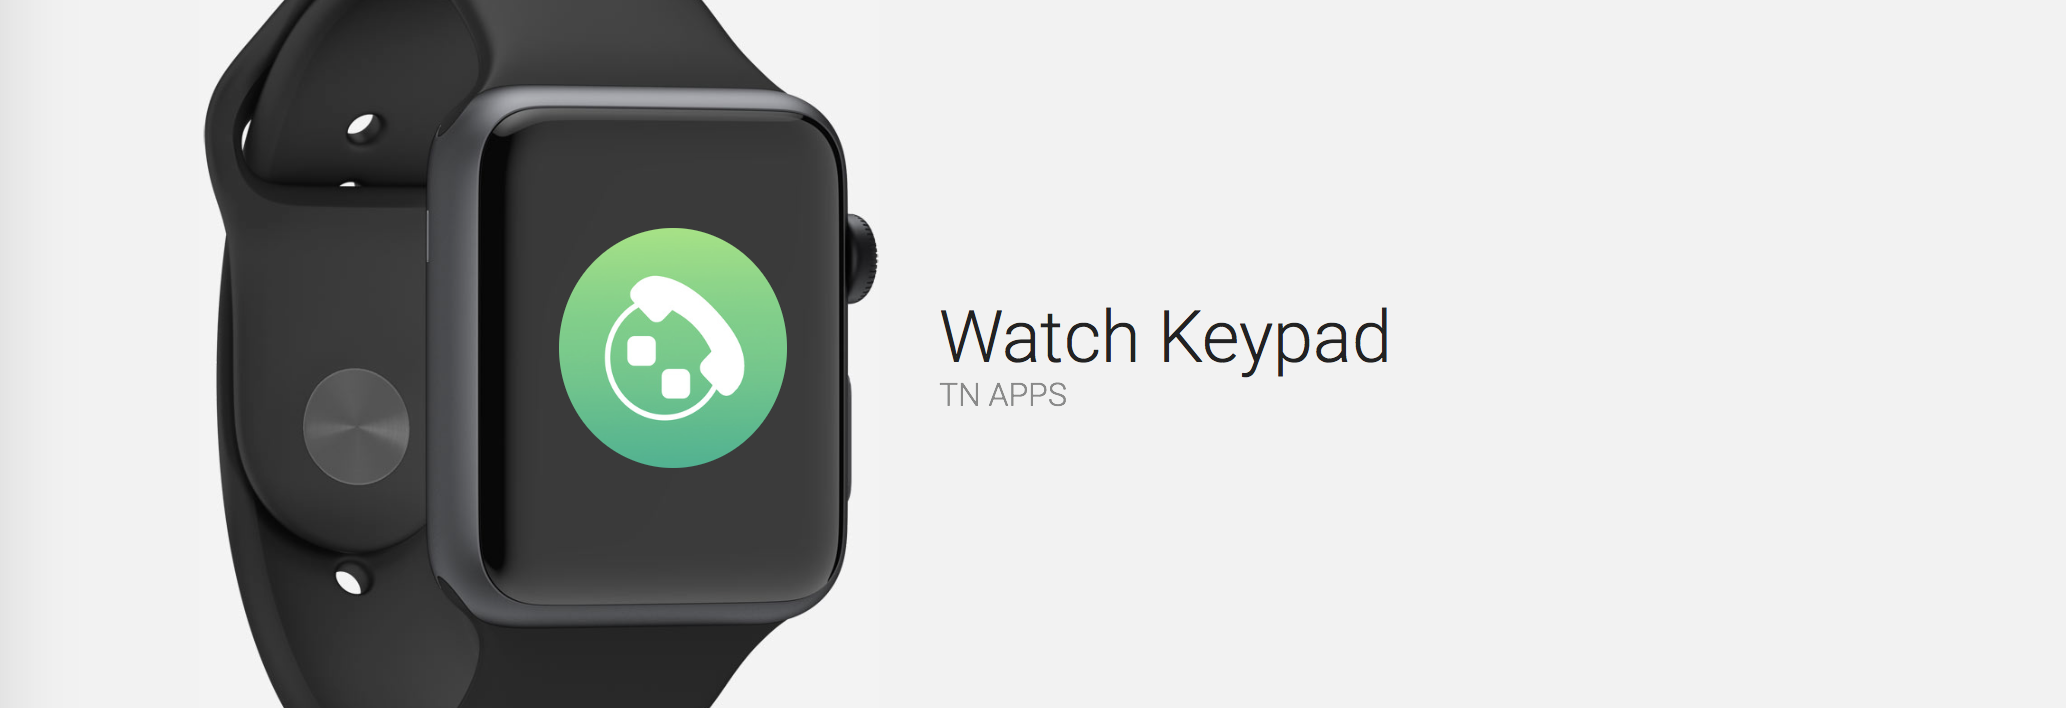 How to dial numbers from your Apple Watch using Watch Keypad